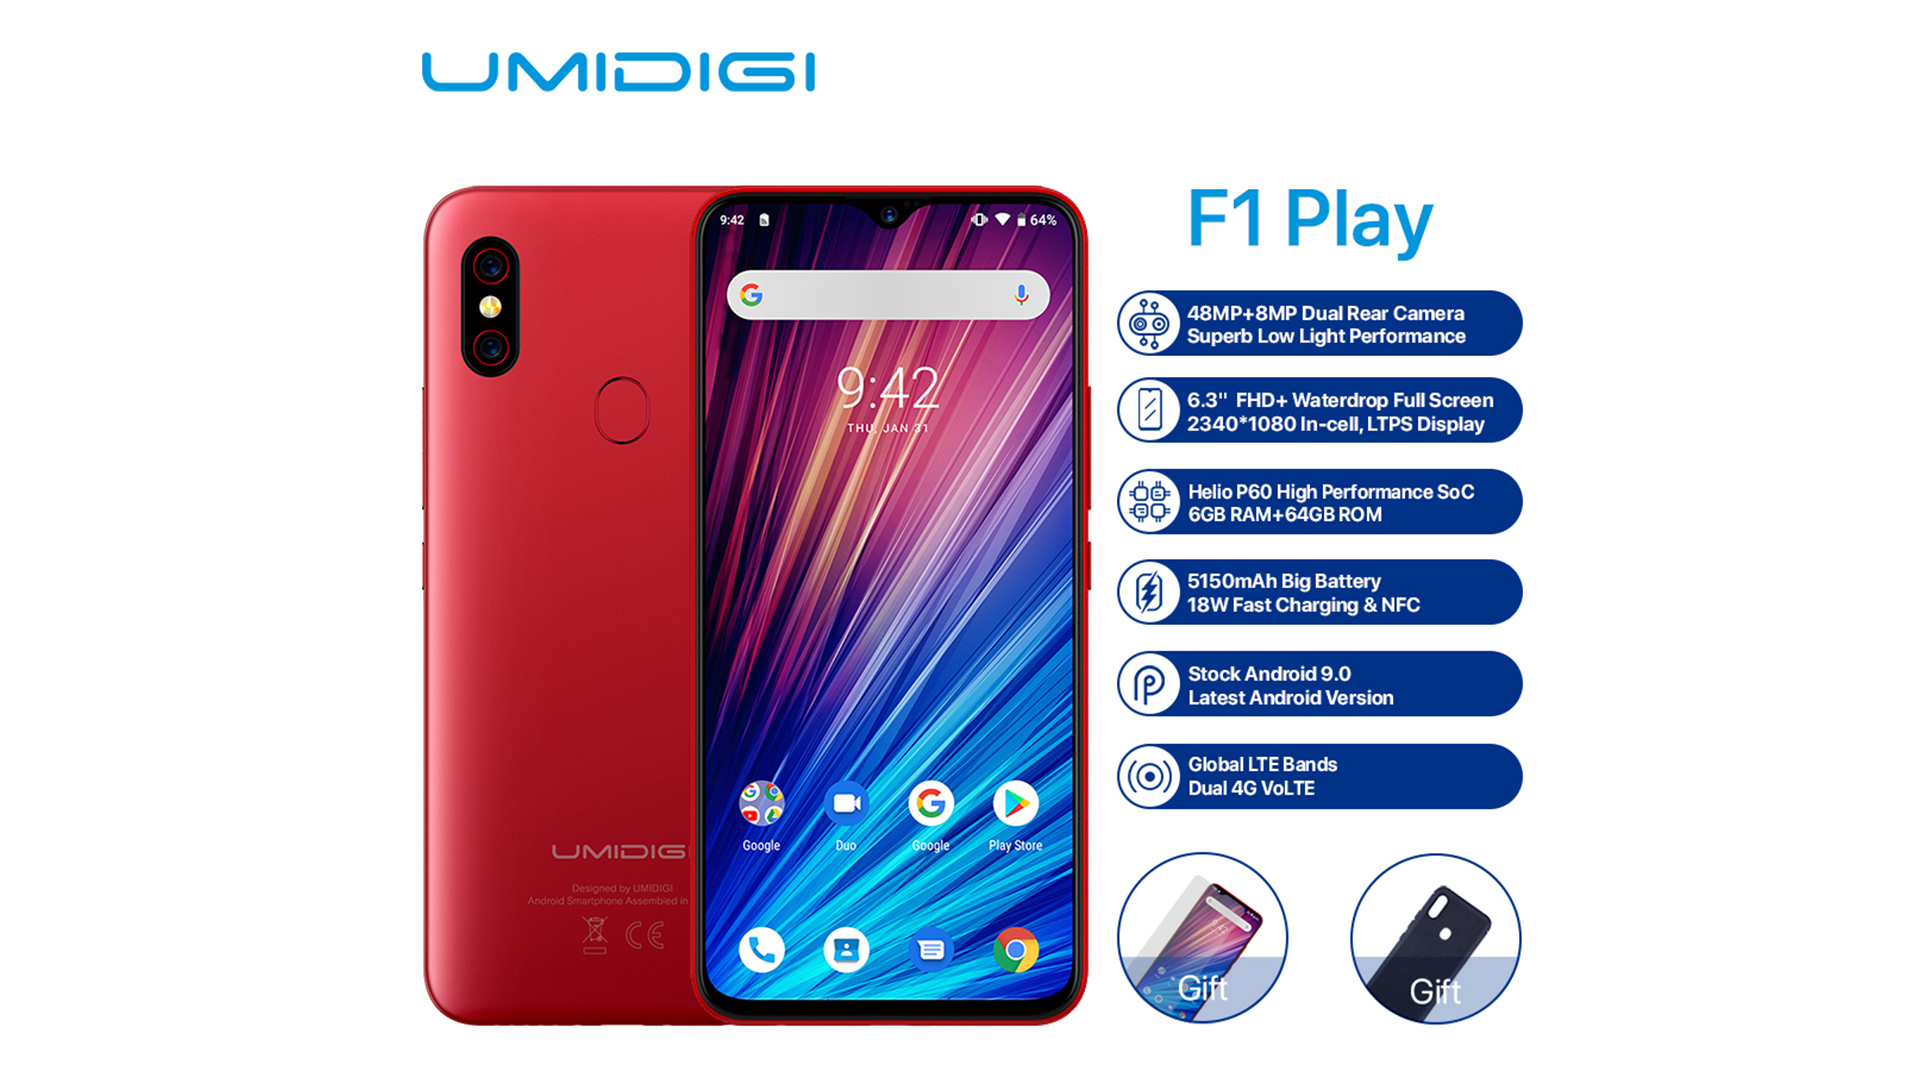 The UMIDIGI F1 Play features flagship specs and is on sale for $199.99